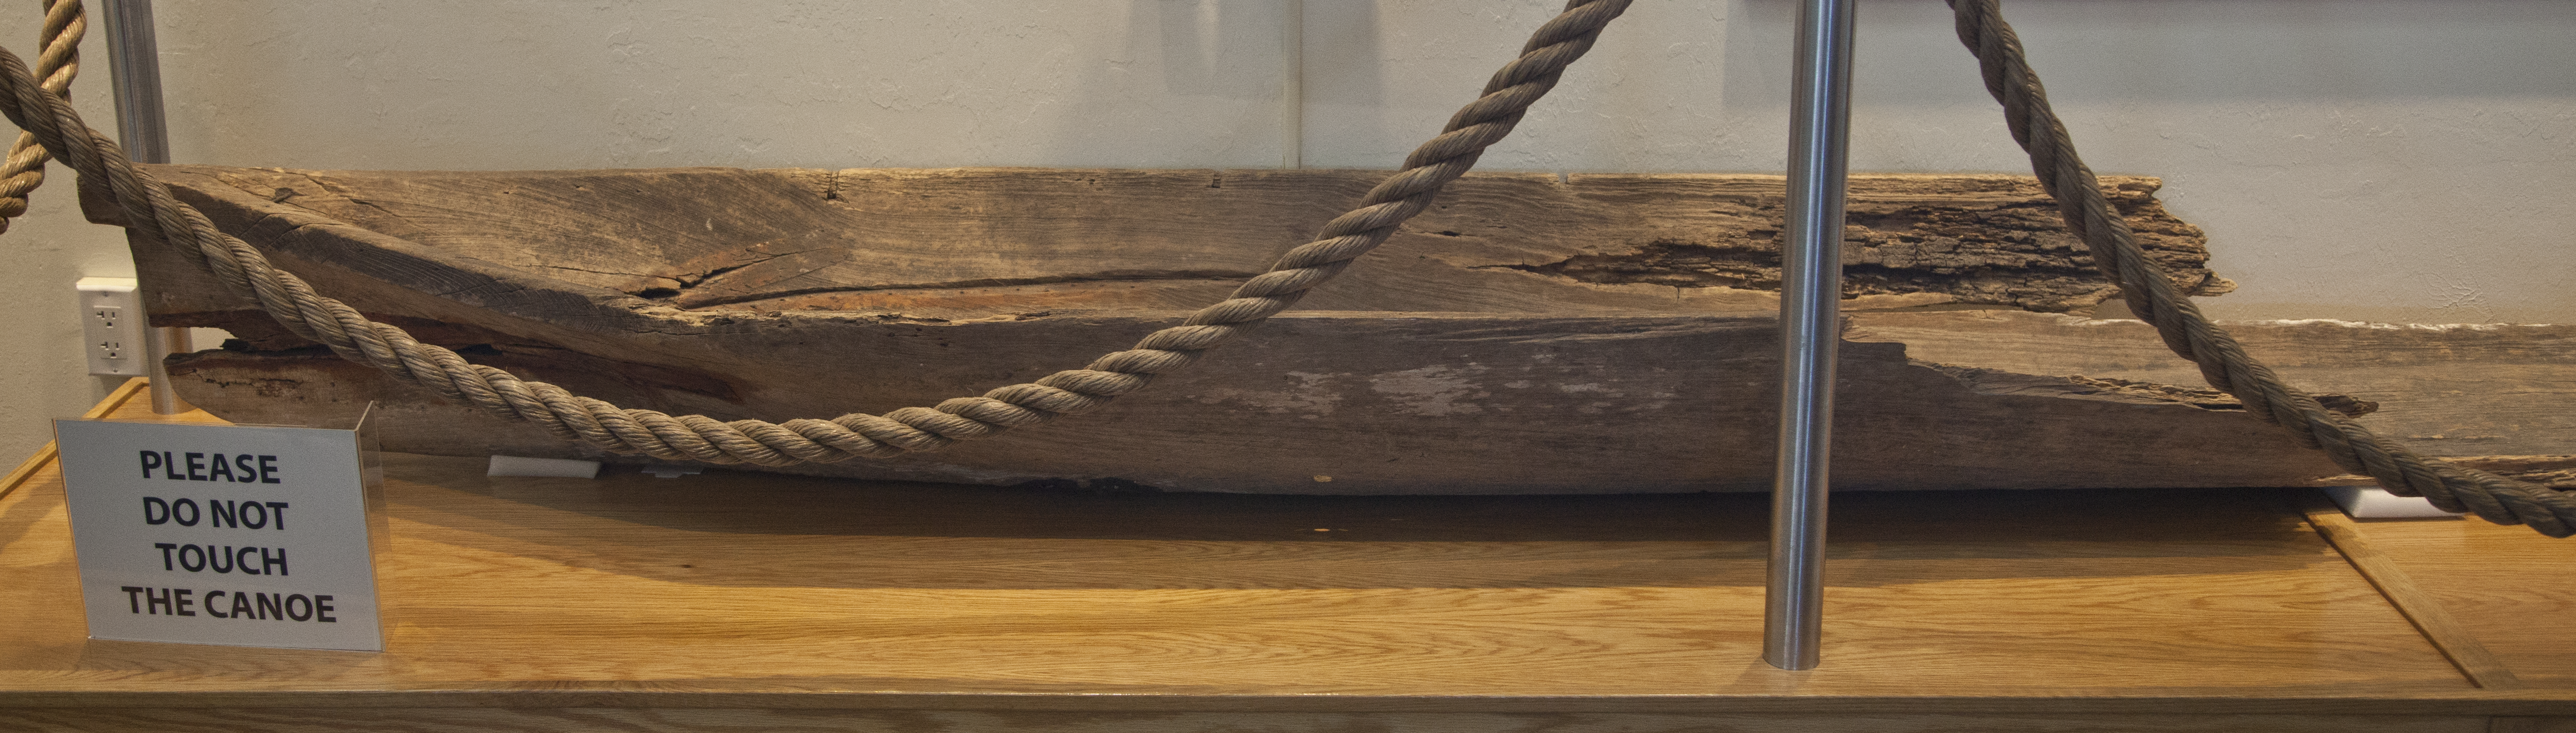 Wooden Dugout Canoe on Display Behind Rope | ClipPix ETC: Educational 